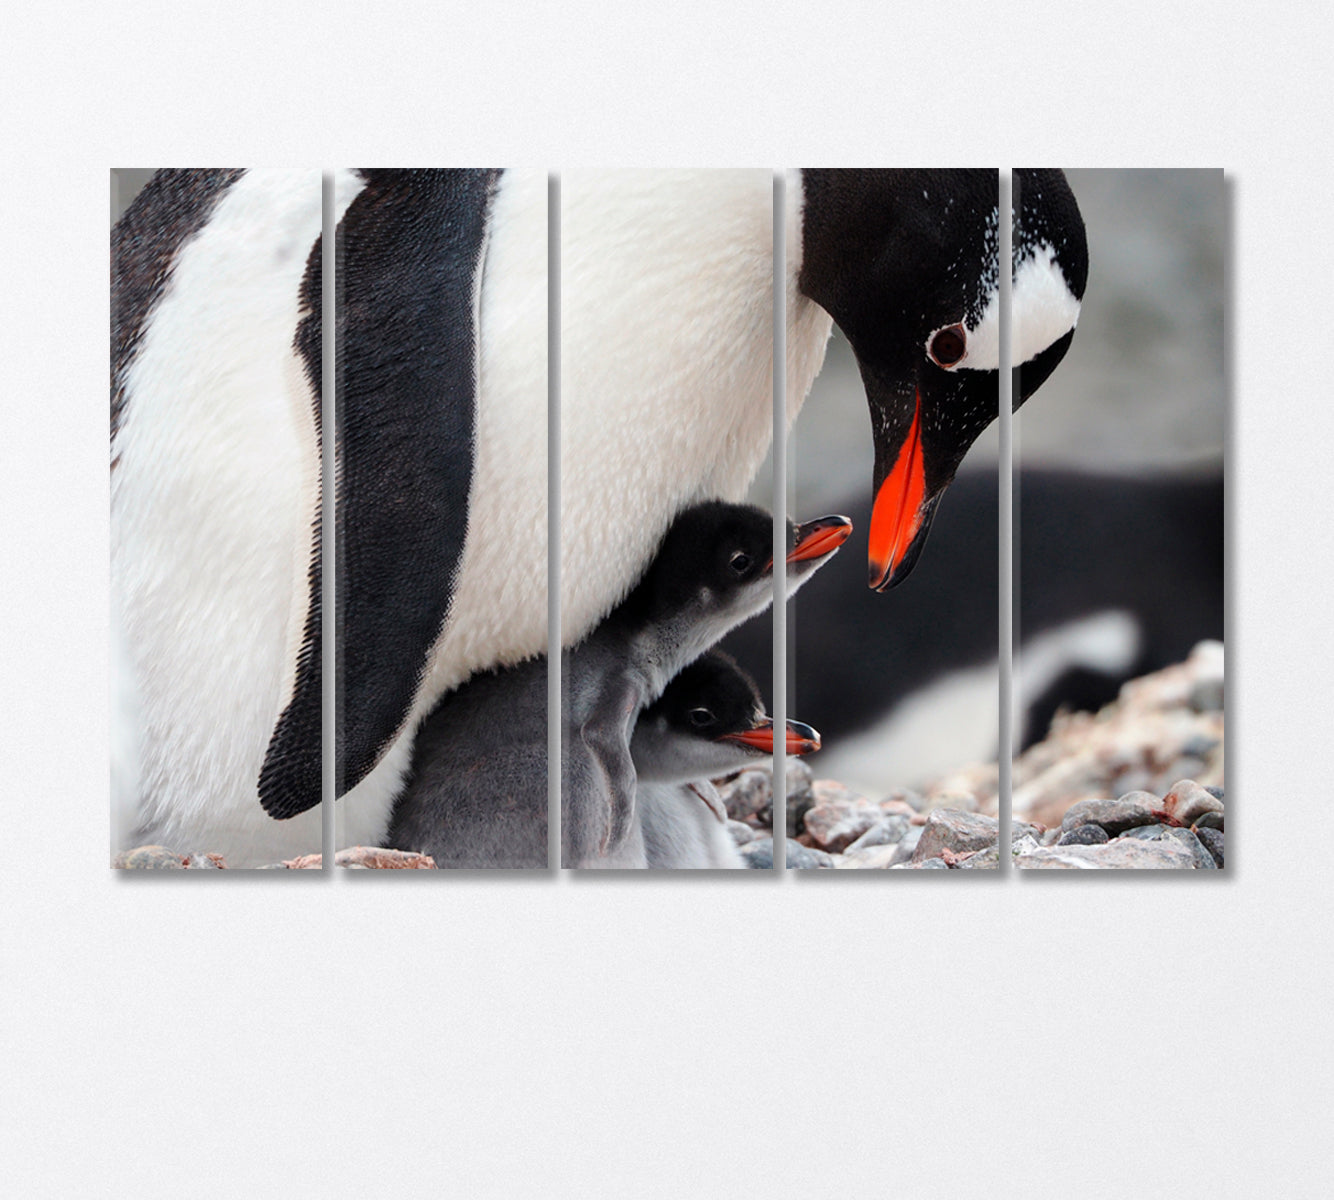 Caring Penguin with Two Chicks Canvas Print-Canvas Print-CetArt-5 Panels-36x24 inches-CetArt